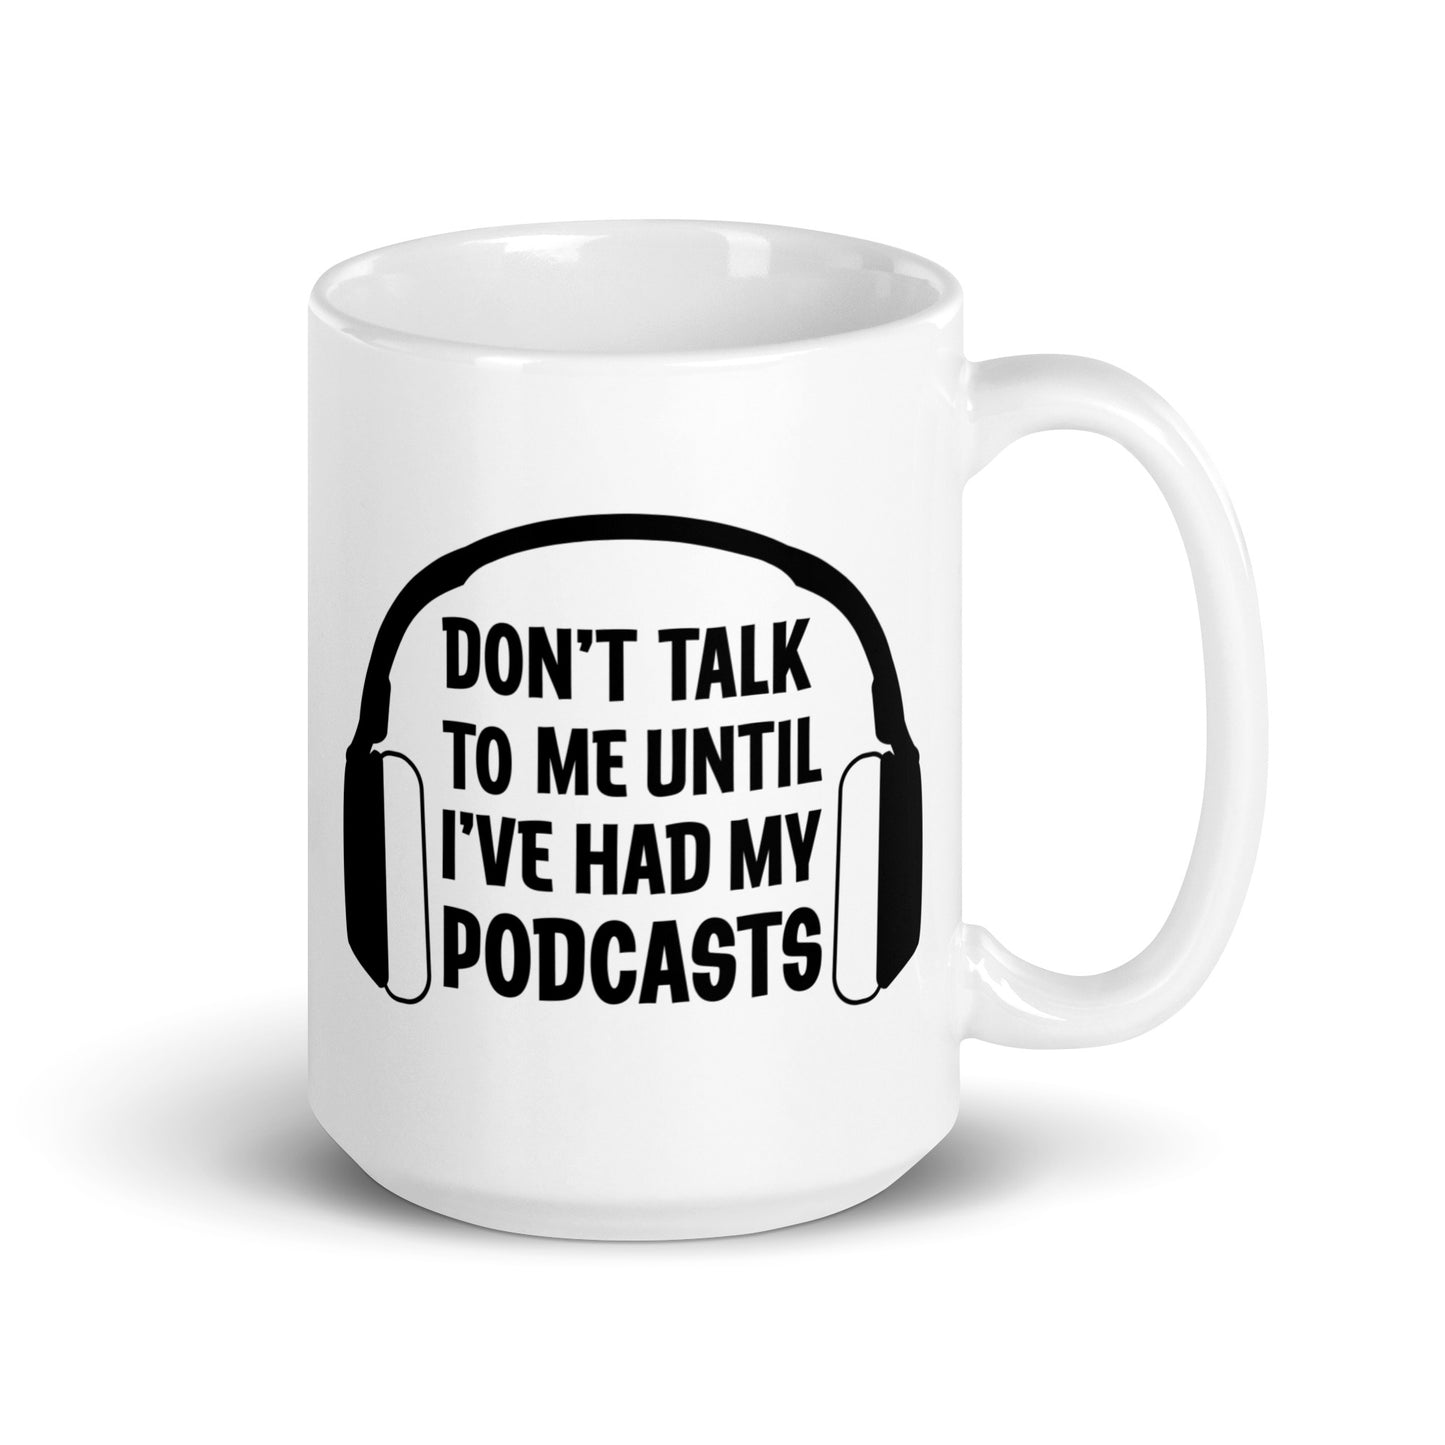 A white 15 ounce ceramic coffee mug featuring an image of headphones surrounding text reading "Don't talk to me until I've had my podcasts"